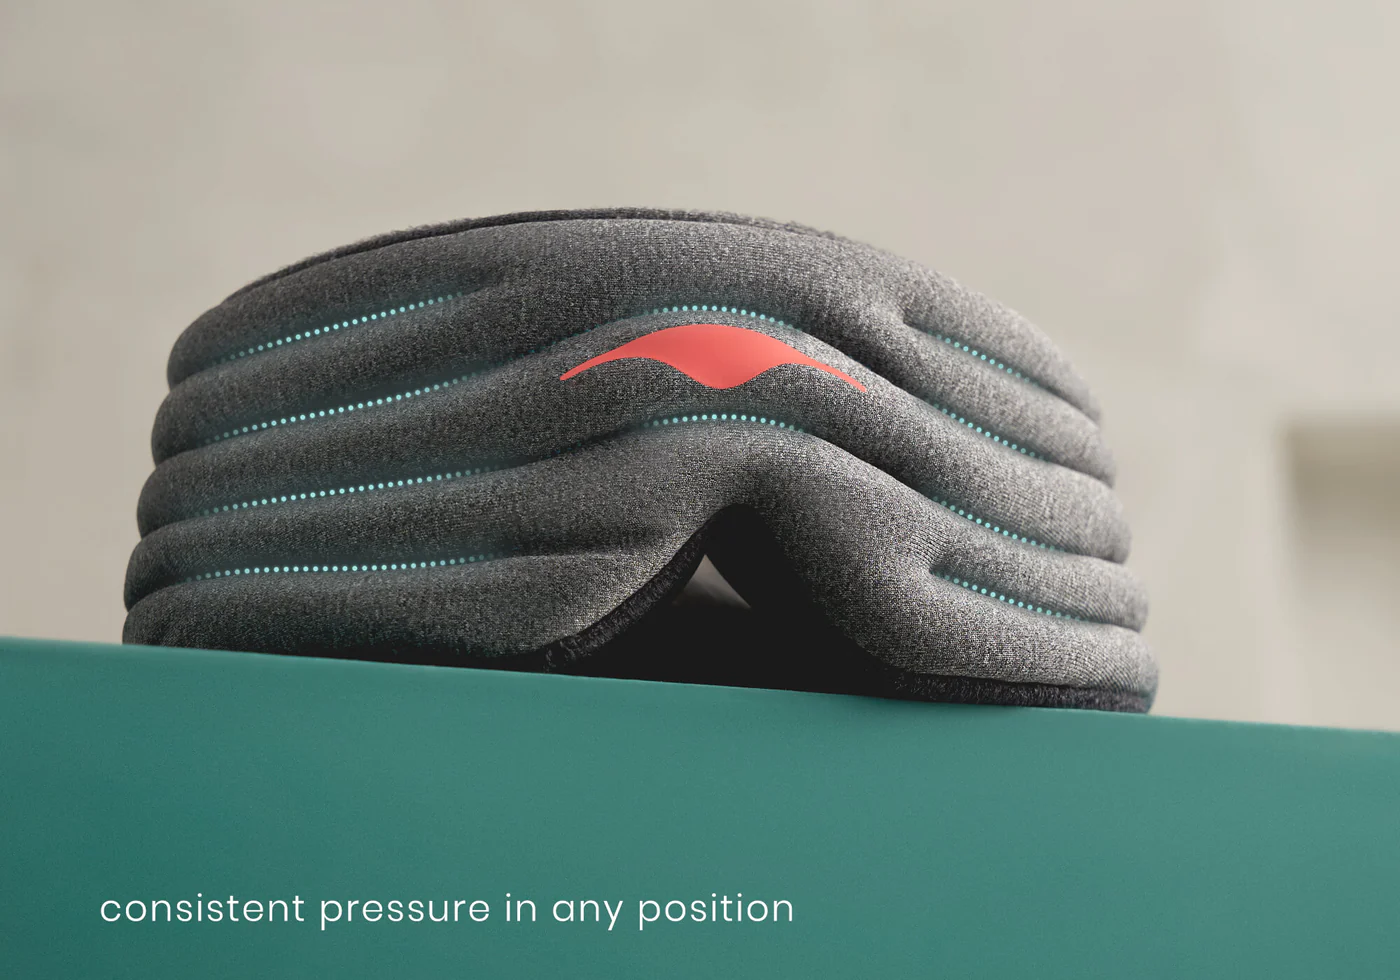 A gray pressure eye mask with aqua stitching on top of a green surface.